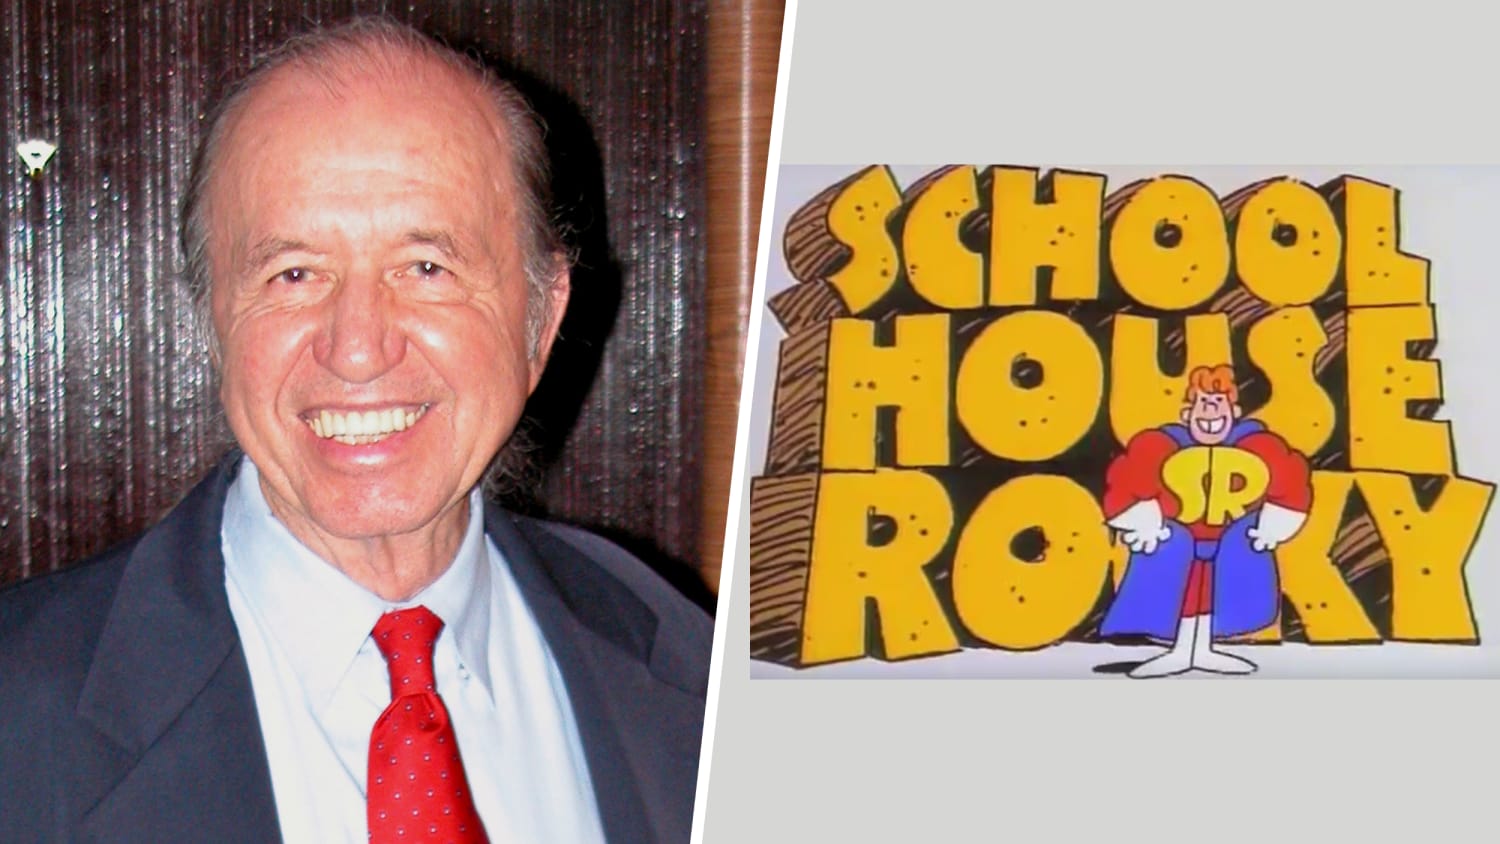 Meaning of Lolly, Lolly, Lolly Get Your Adverbs Here by Schoolhouse Rock  (Ft. Bob Dorough)